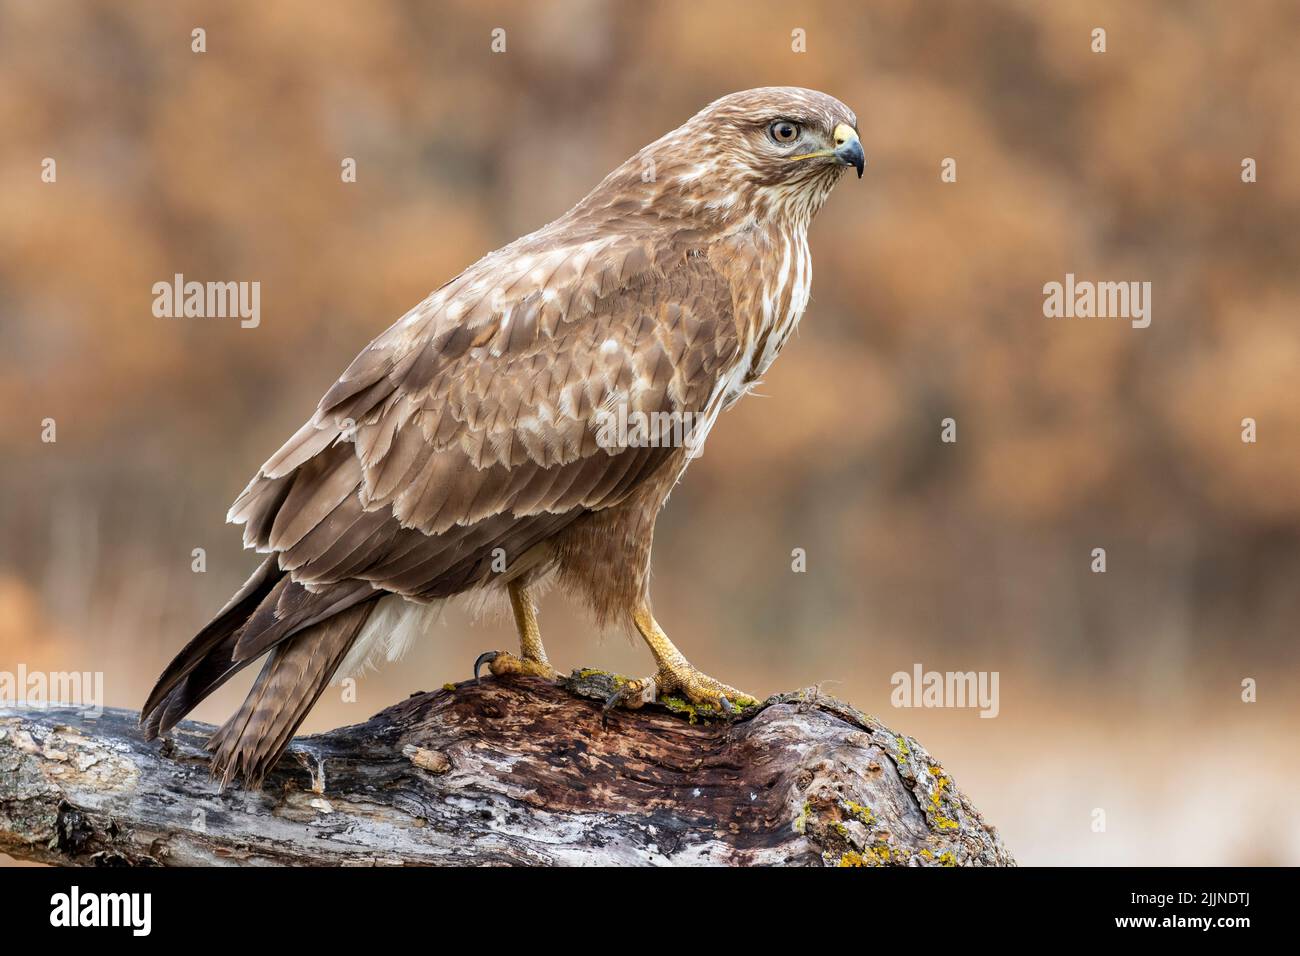 Common buzzard, Buteo buteo, perched on a log on an autumnal brown background Stock Photo